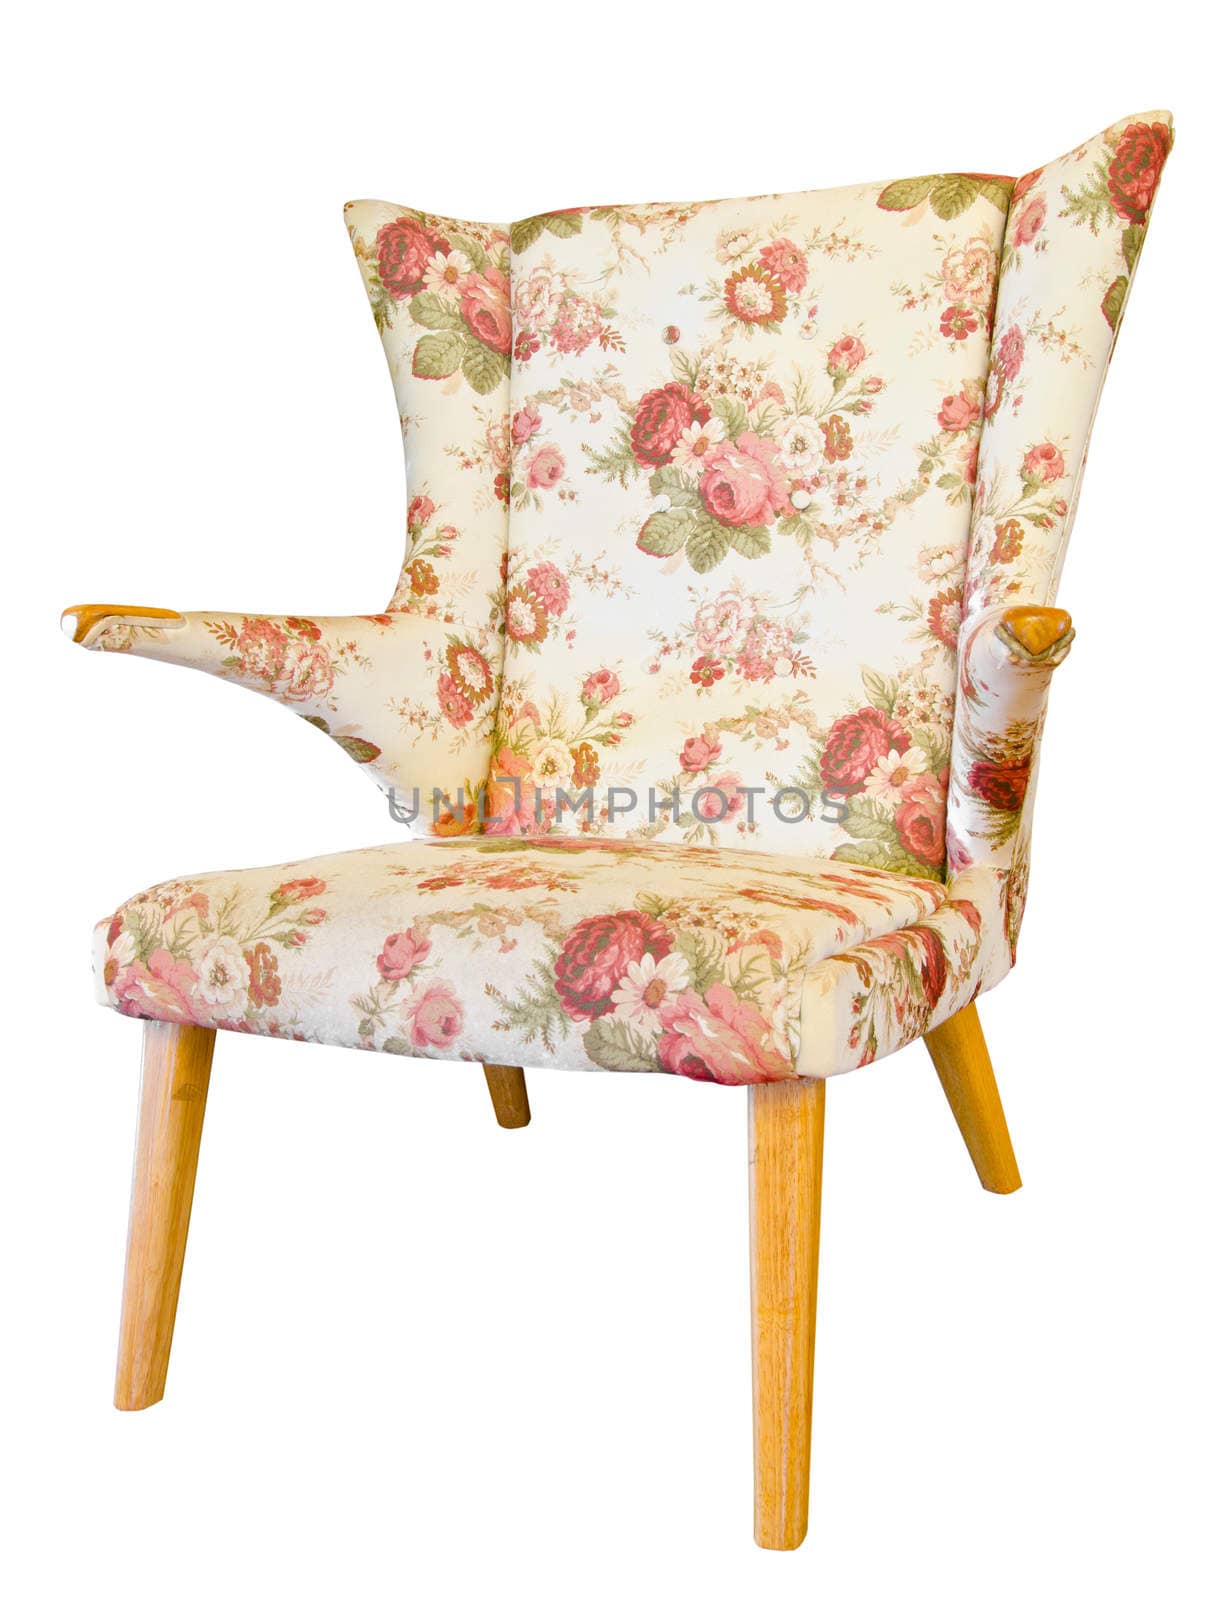 vintage chair isolated white background, clipping path